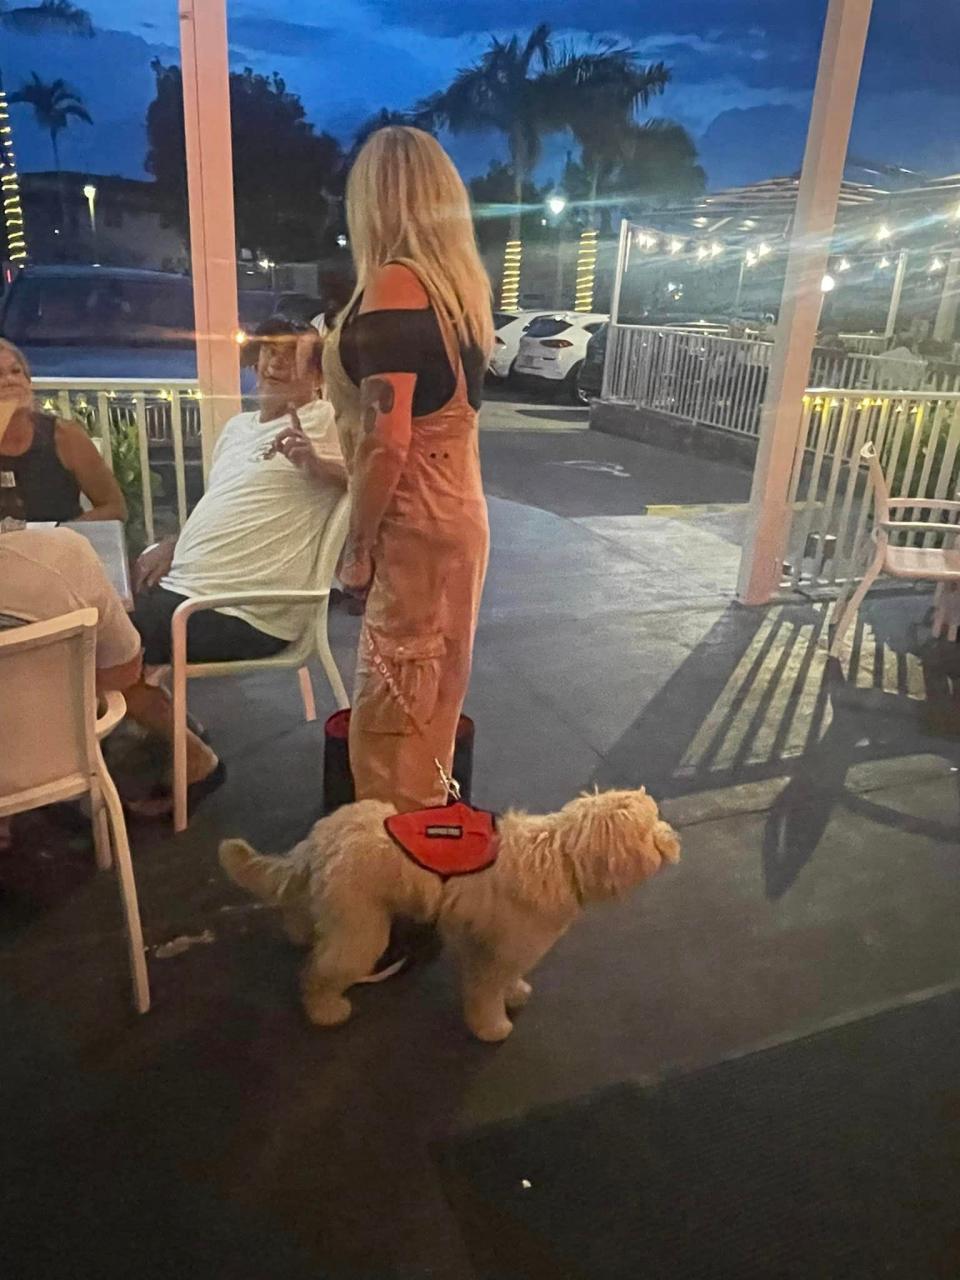 Francie Chapman, wife of Duane "Dog the Bounty Hunter" Chapman, is pictured chatting with locals at Sami's Pizza and Grill in Marco Island.